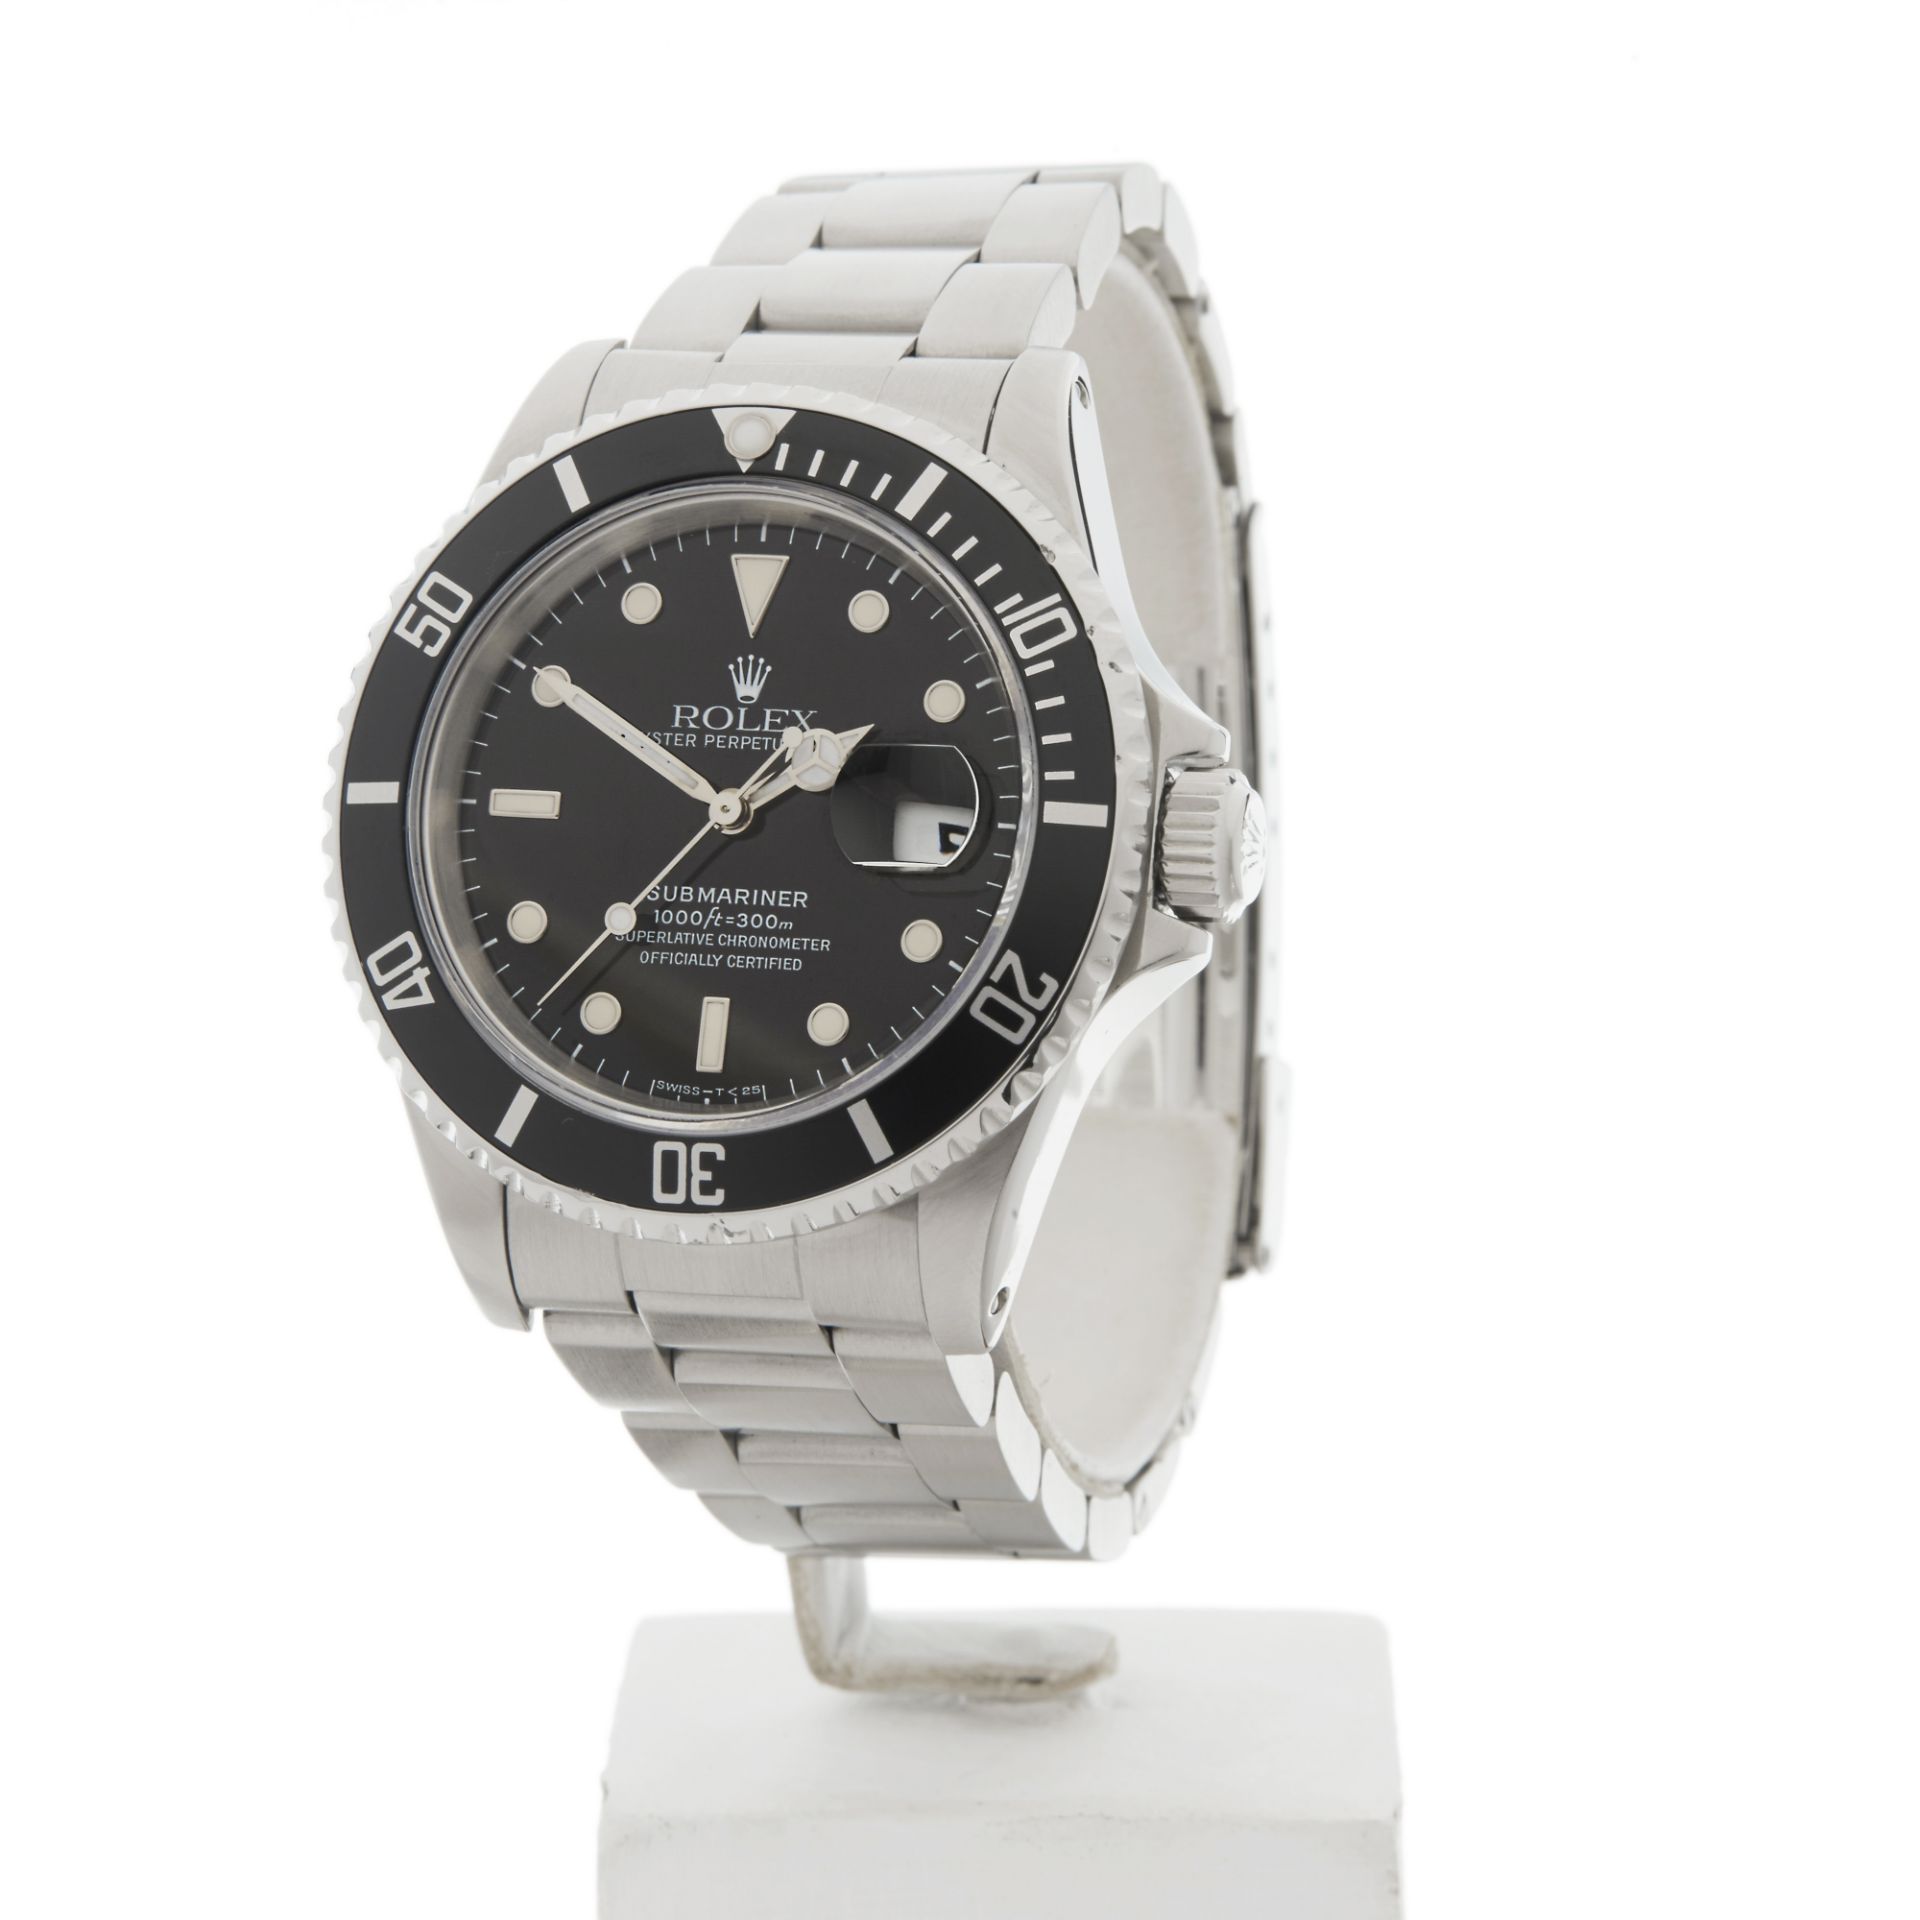 Rolex Submariner 40mm Stainless Steel - 16610 - Image 3 of 9